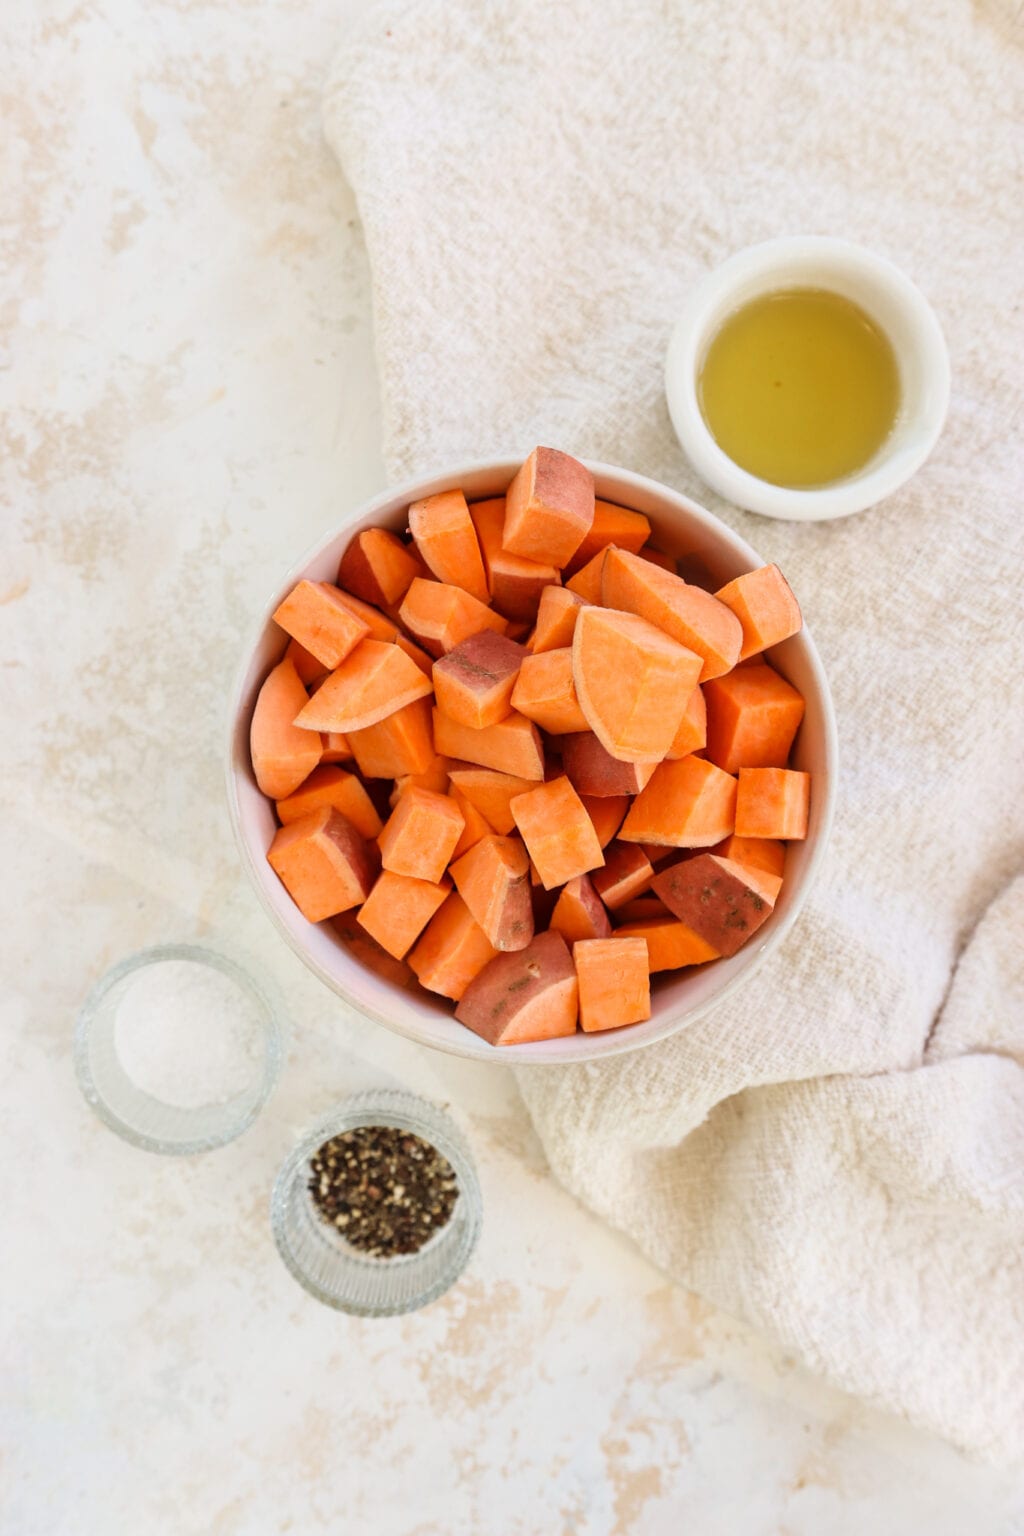 Ingredients for roasted sweet potatoes in white and clear glass bowls, including sweet potatoes, avocado oil, salt, freshly ground black pepper